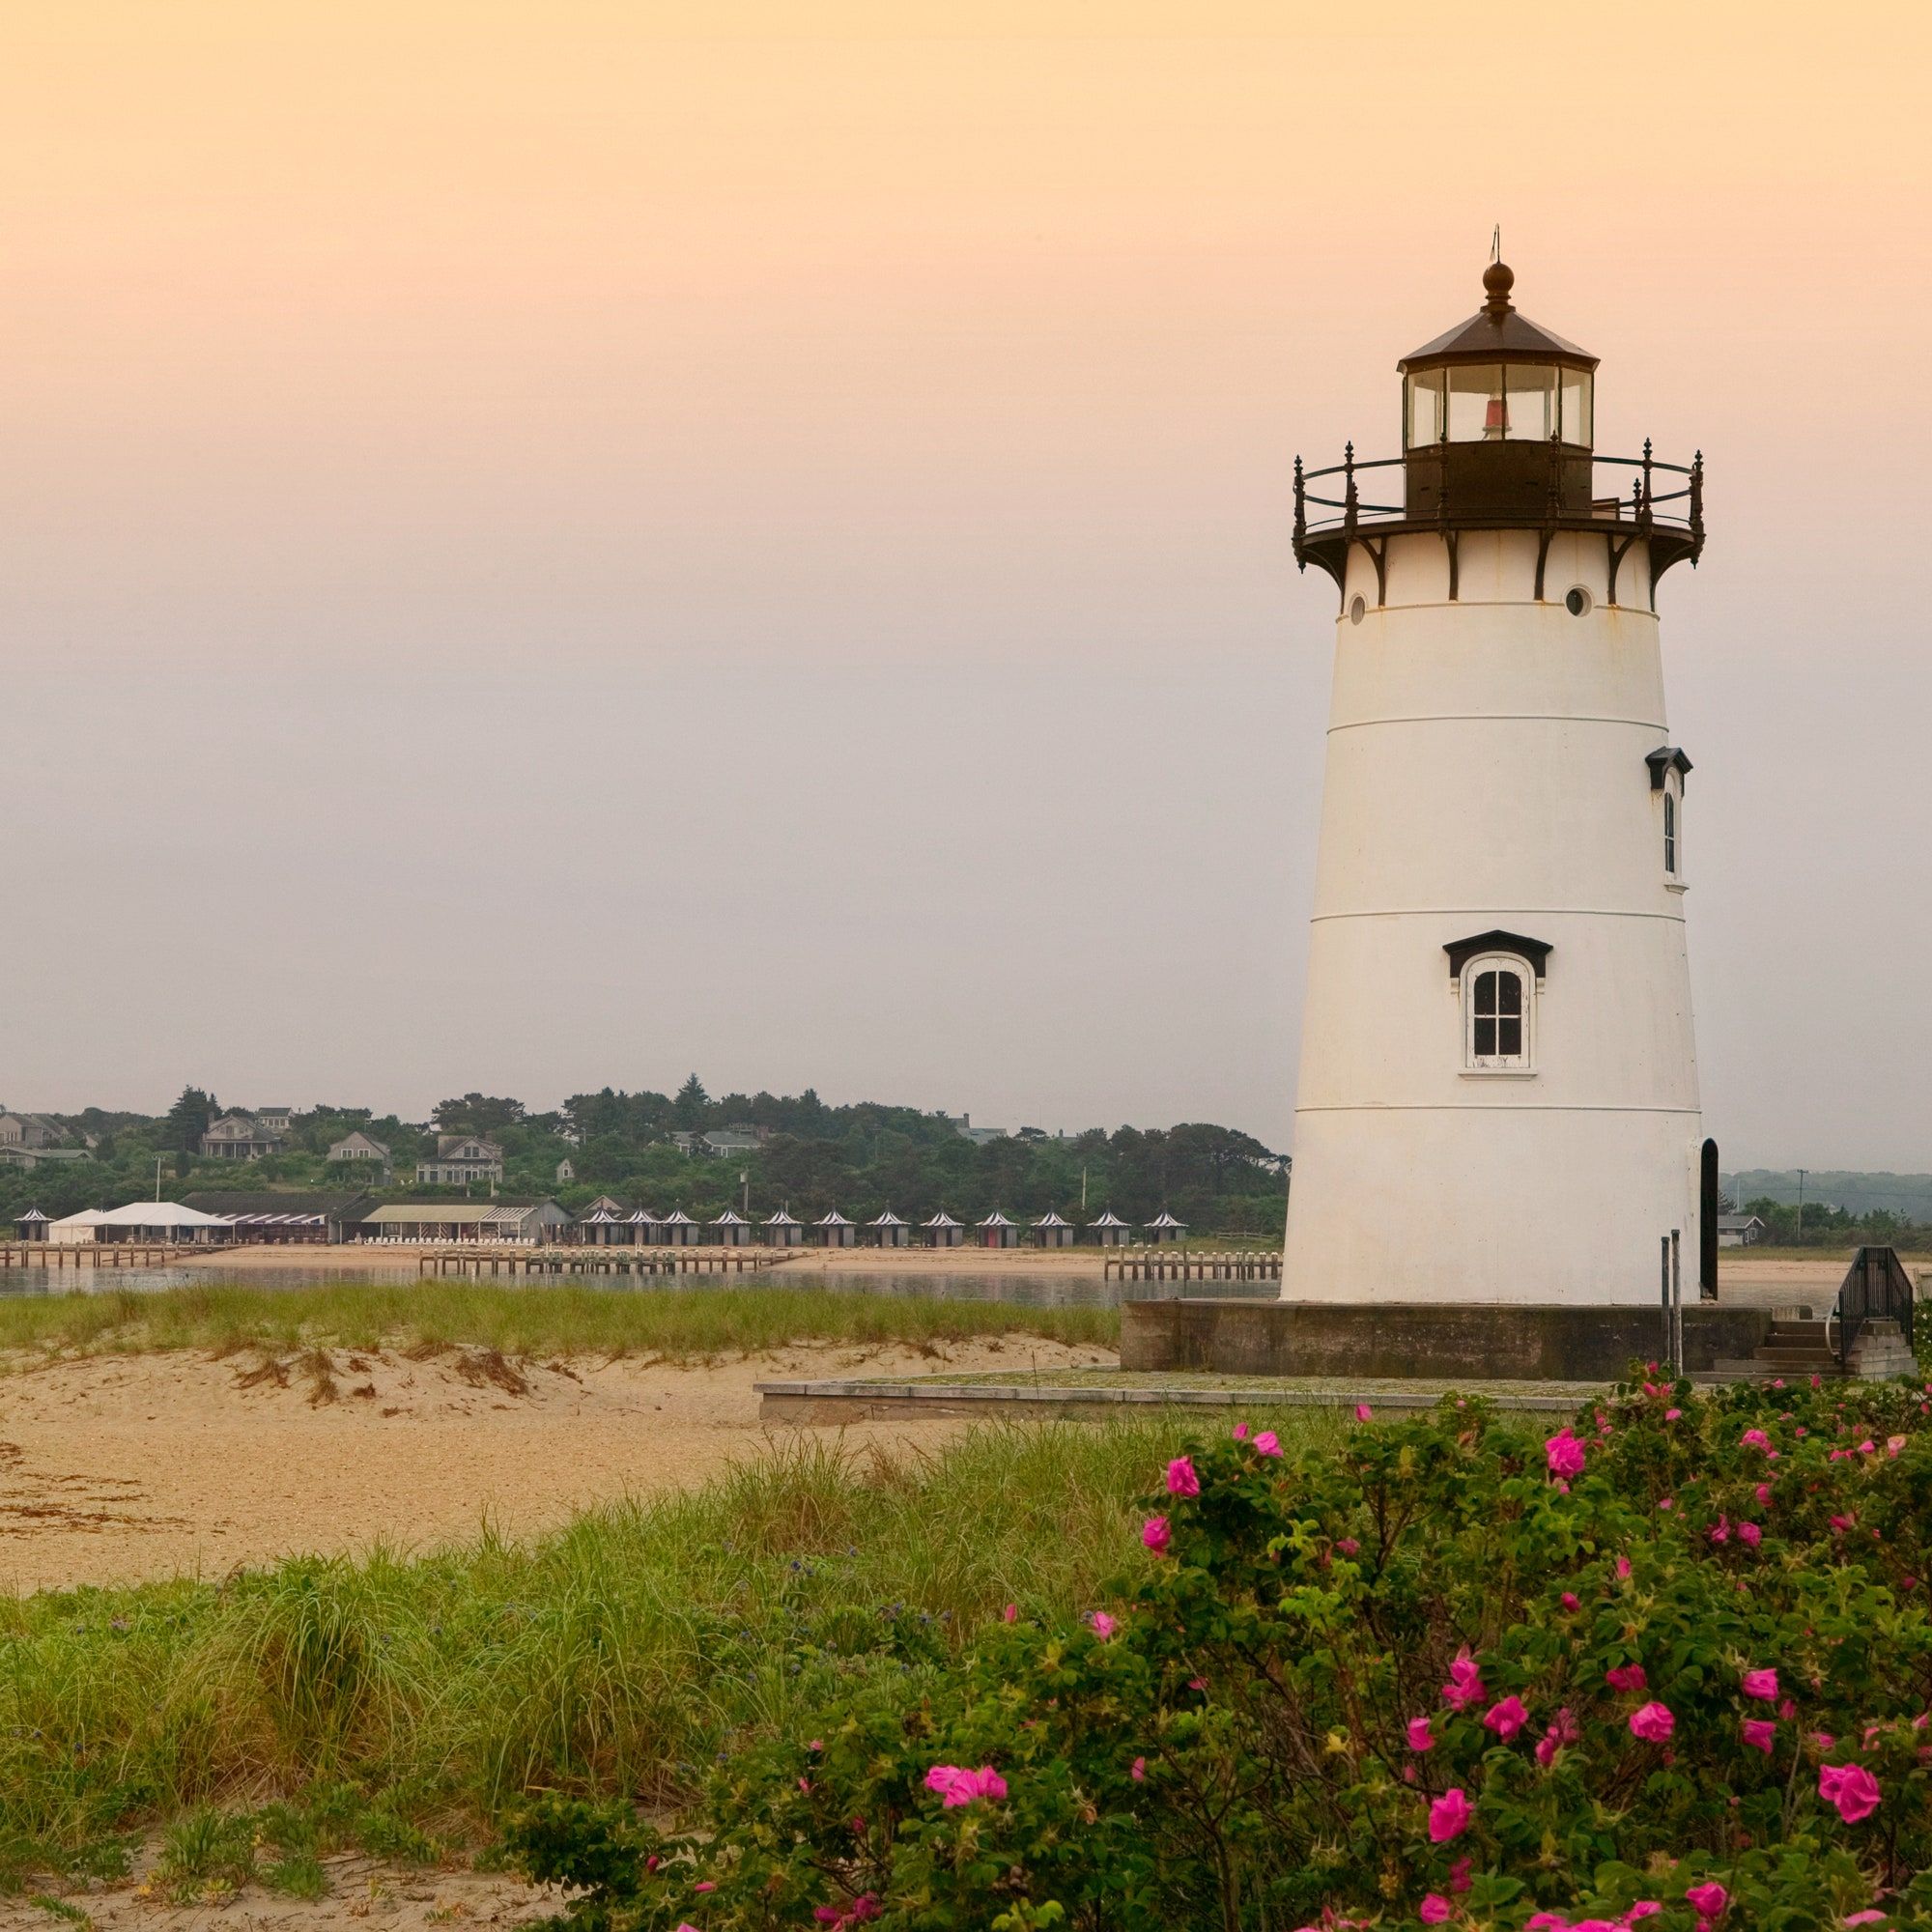 Where to Eat, Drink and Shop in Edgartown, Martha's Vineyard